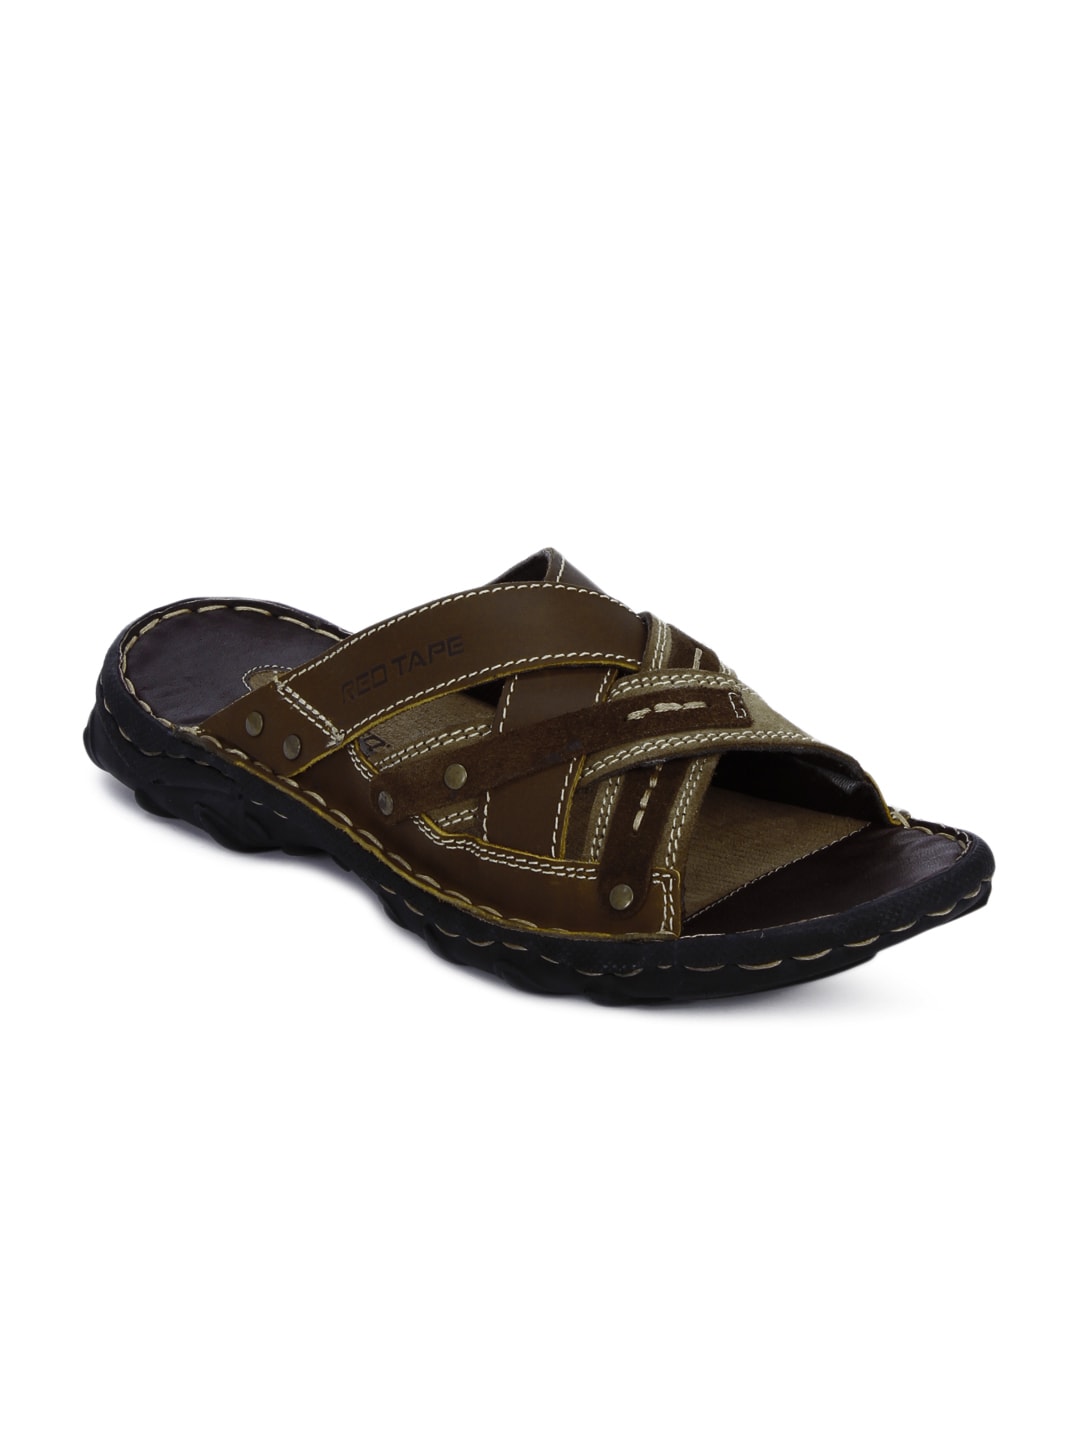 Red Tape Men Casual Brown Sandals